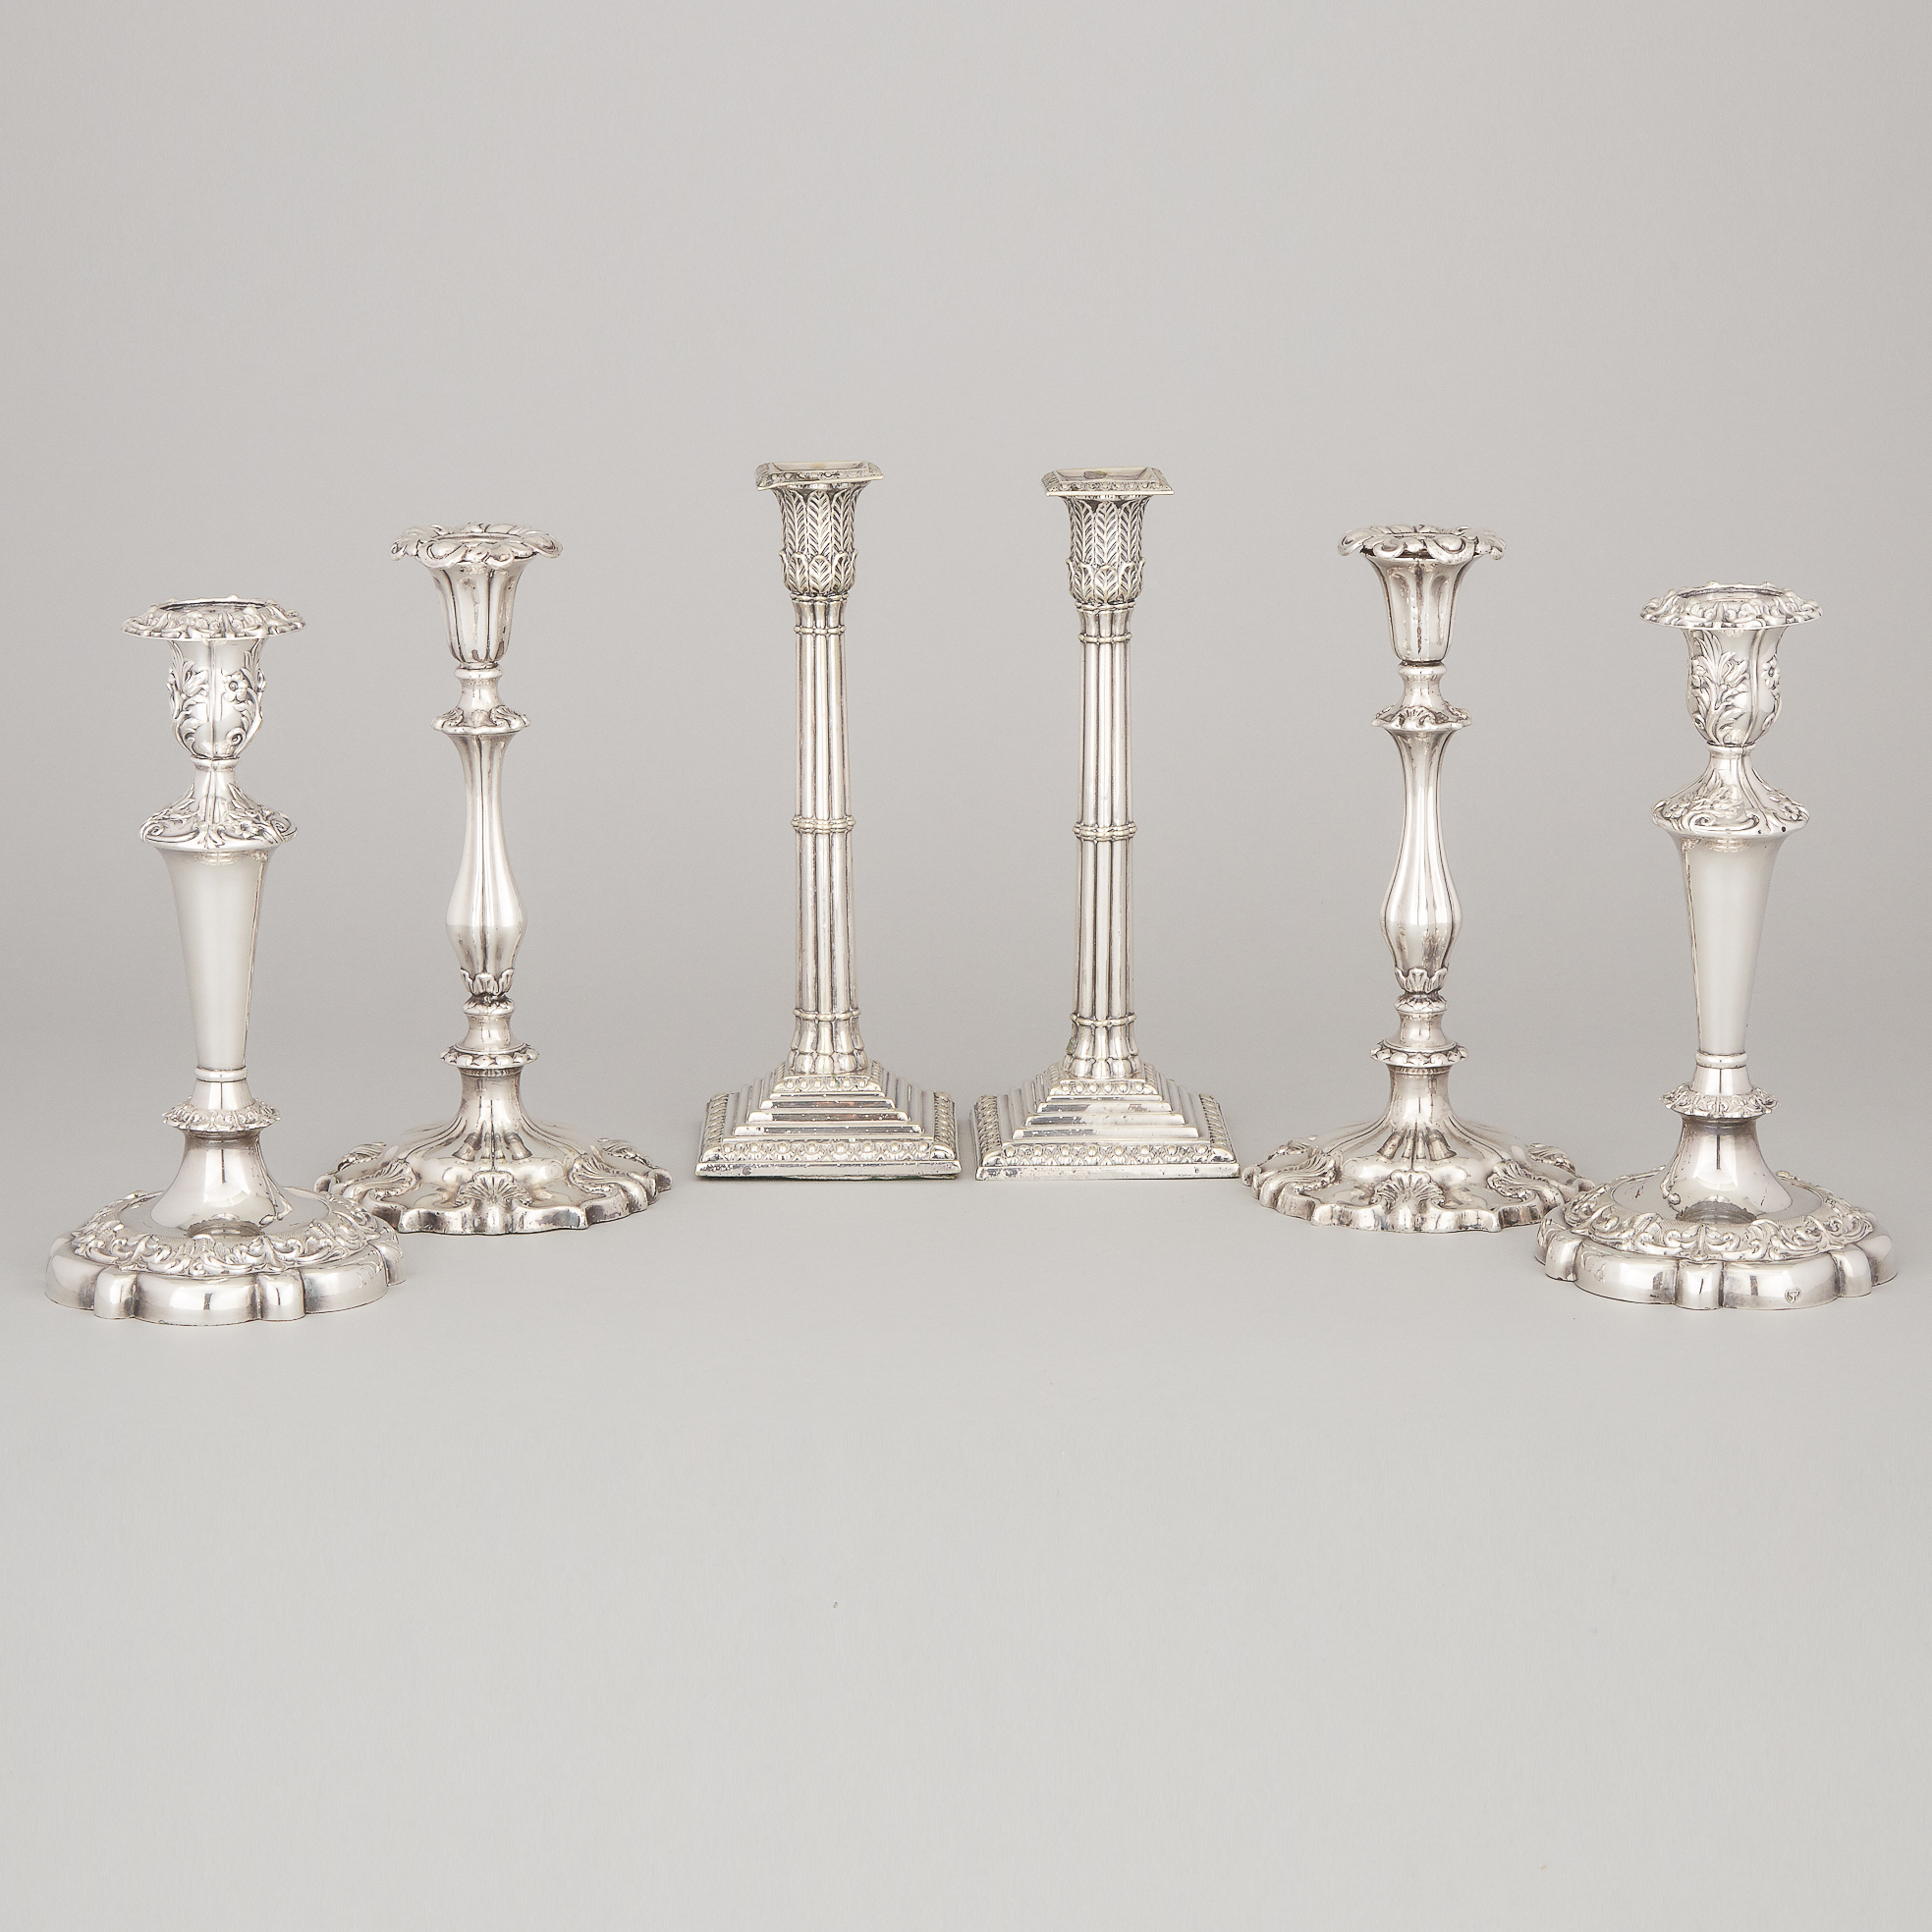 Three Pairs of Victorian and Later English Silver Plated Table Candlesticks, 19th/early 20th century